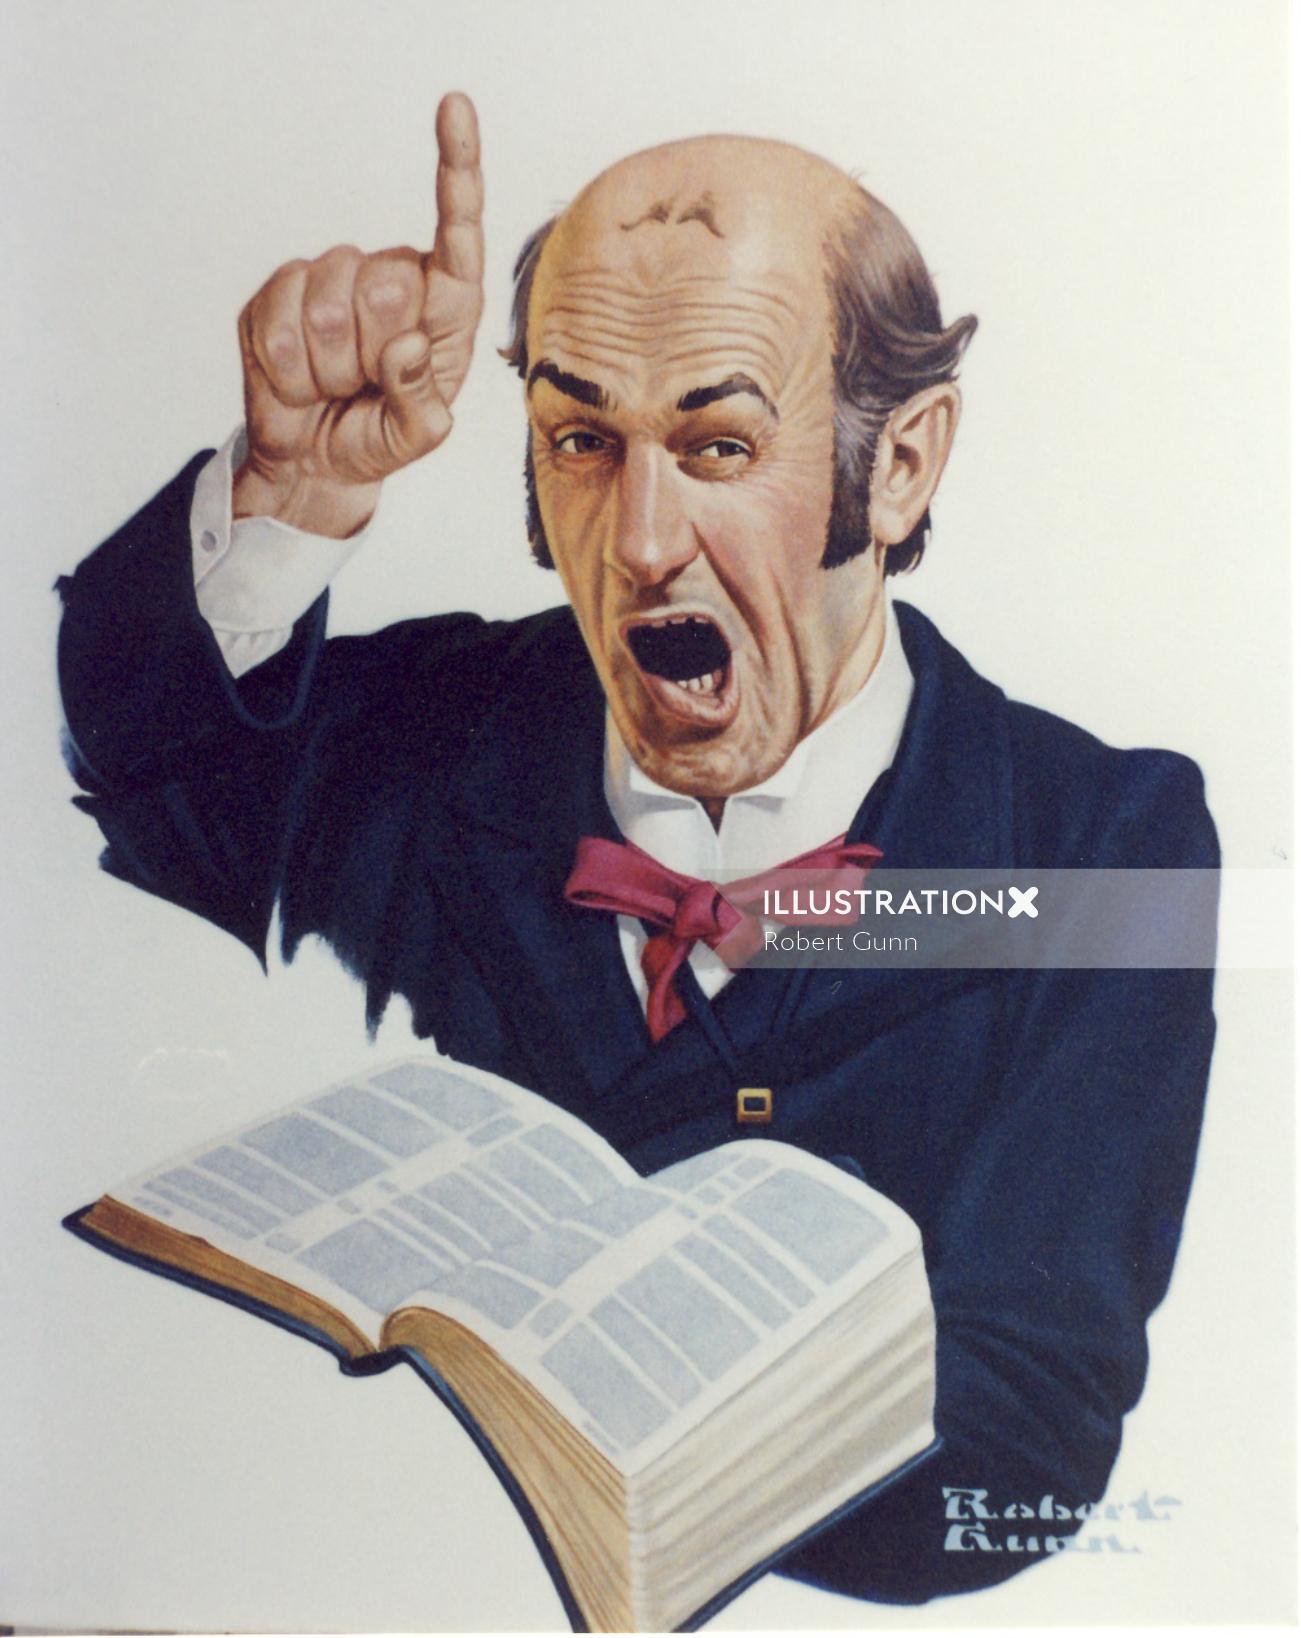 Illustration of preacher calling down the wrath of God on unrepentant sinners